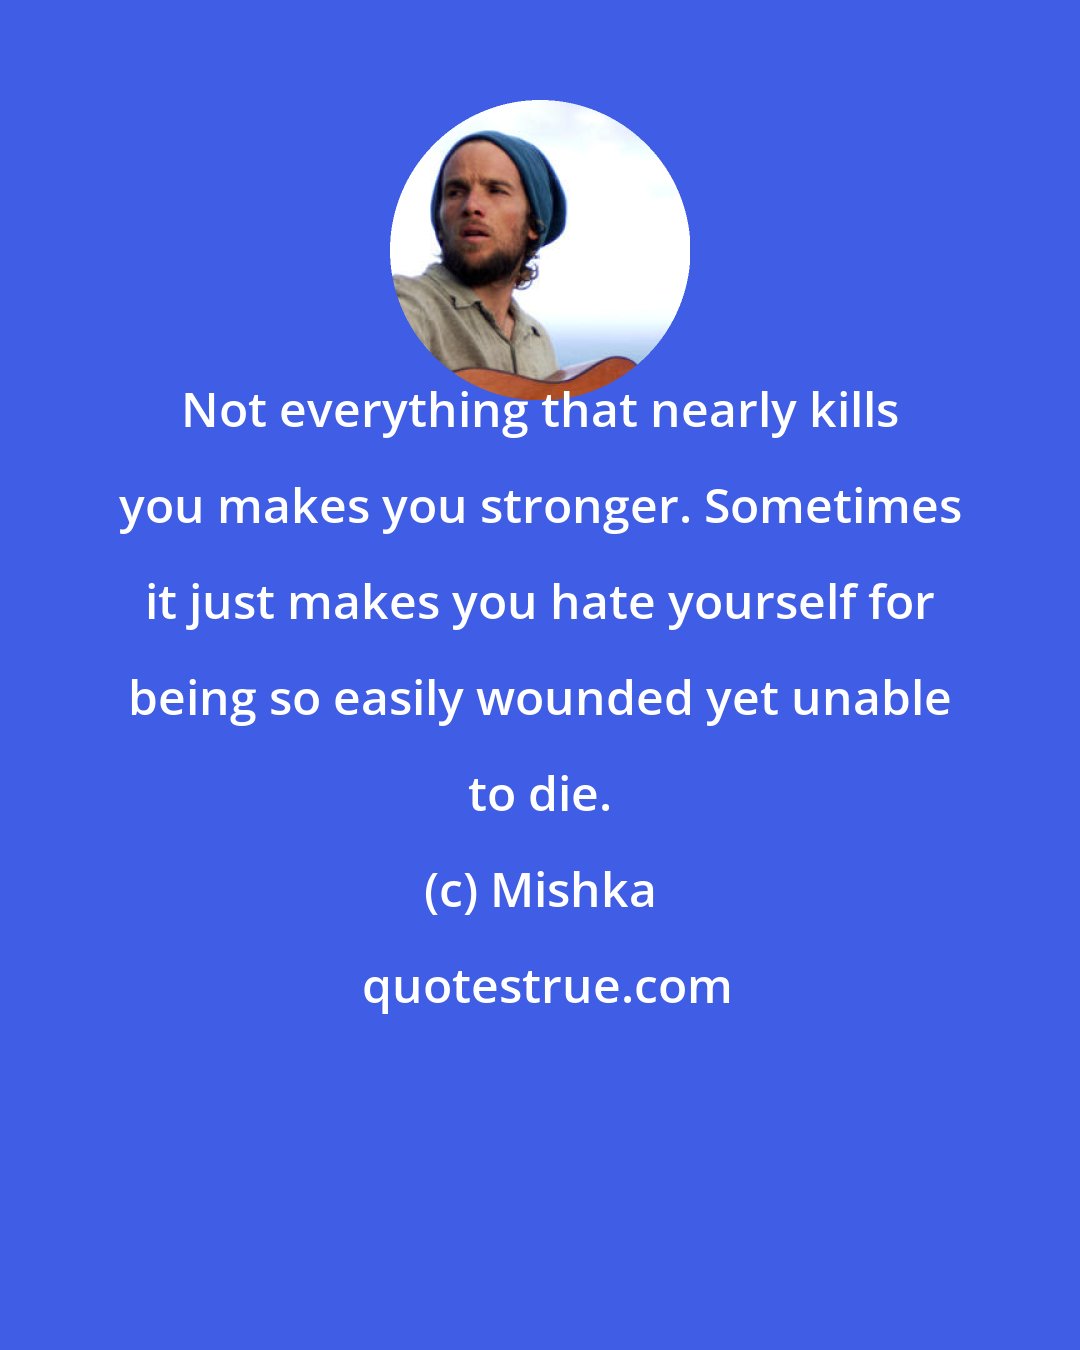 Mishka: Not everything that nearly kills you makes you stronger. Sometimes it just makes you hate yourself for being so easily wounded yet unable to die.